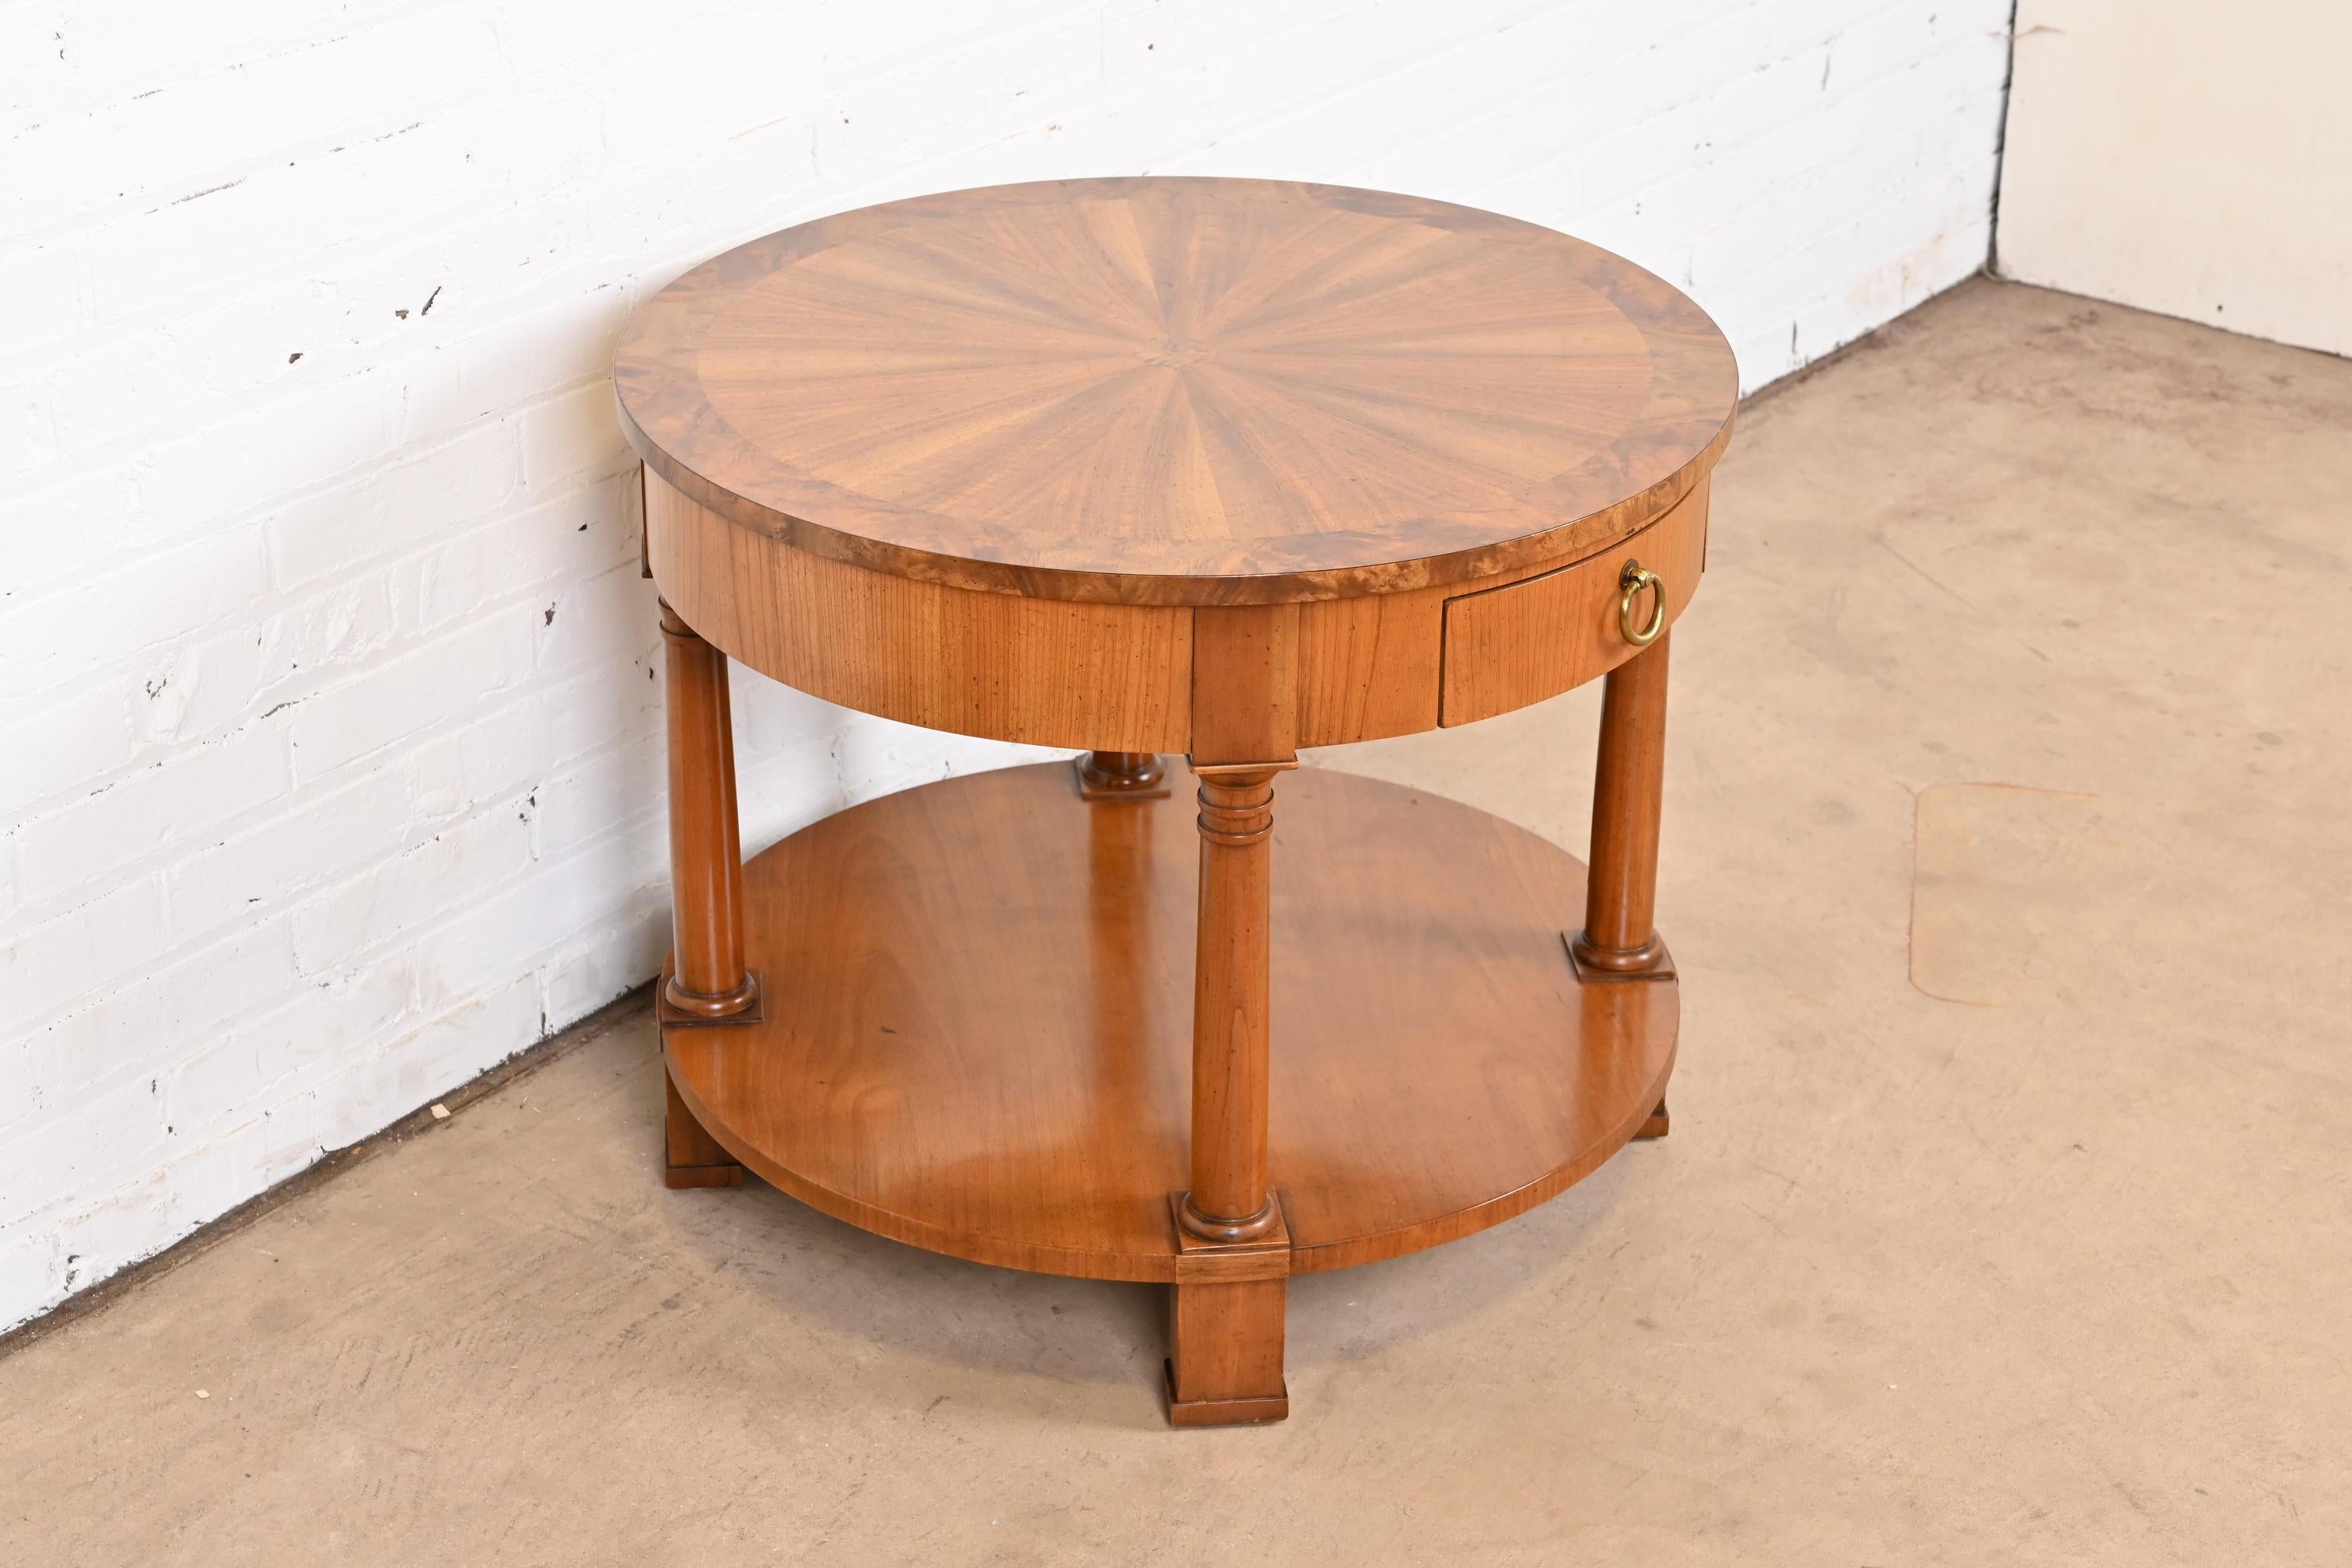 20th Century Baker Furniture French Empire Cherry and Burl Wood Tea Table with Starburst Top